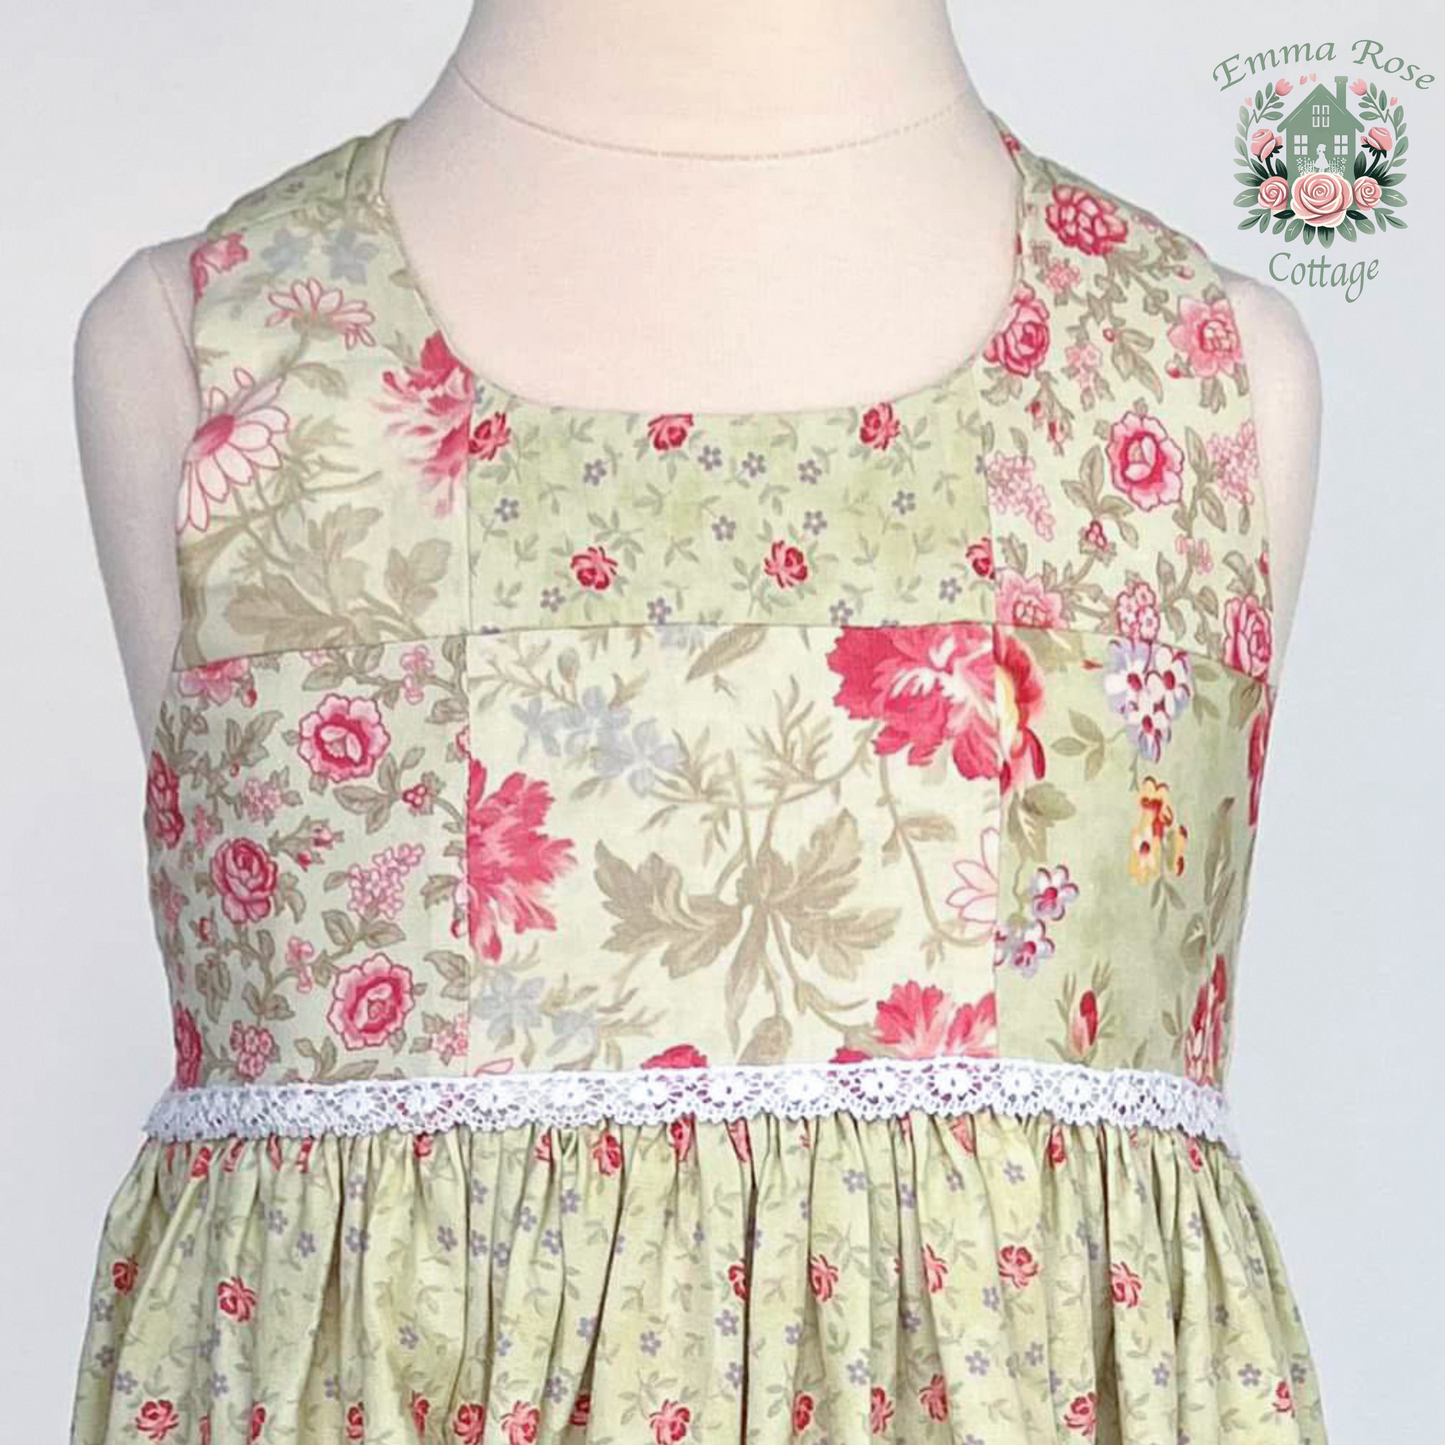 Spring Blossom - Size 7. Colorful patchwork bodice and criss cross straps with large bow in back